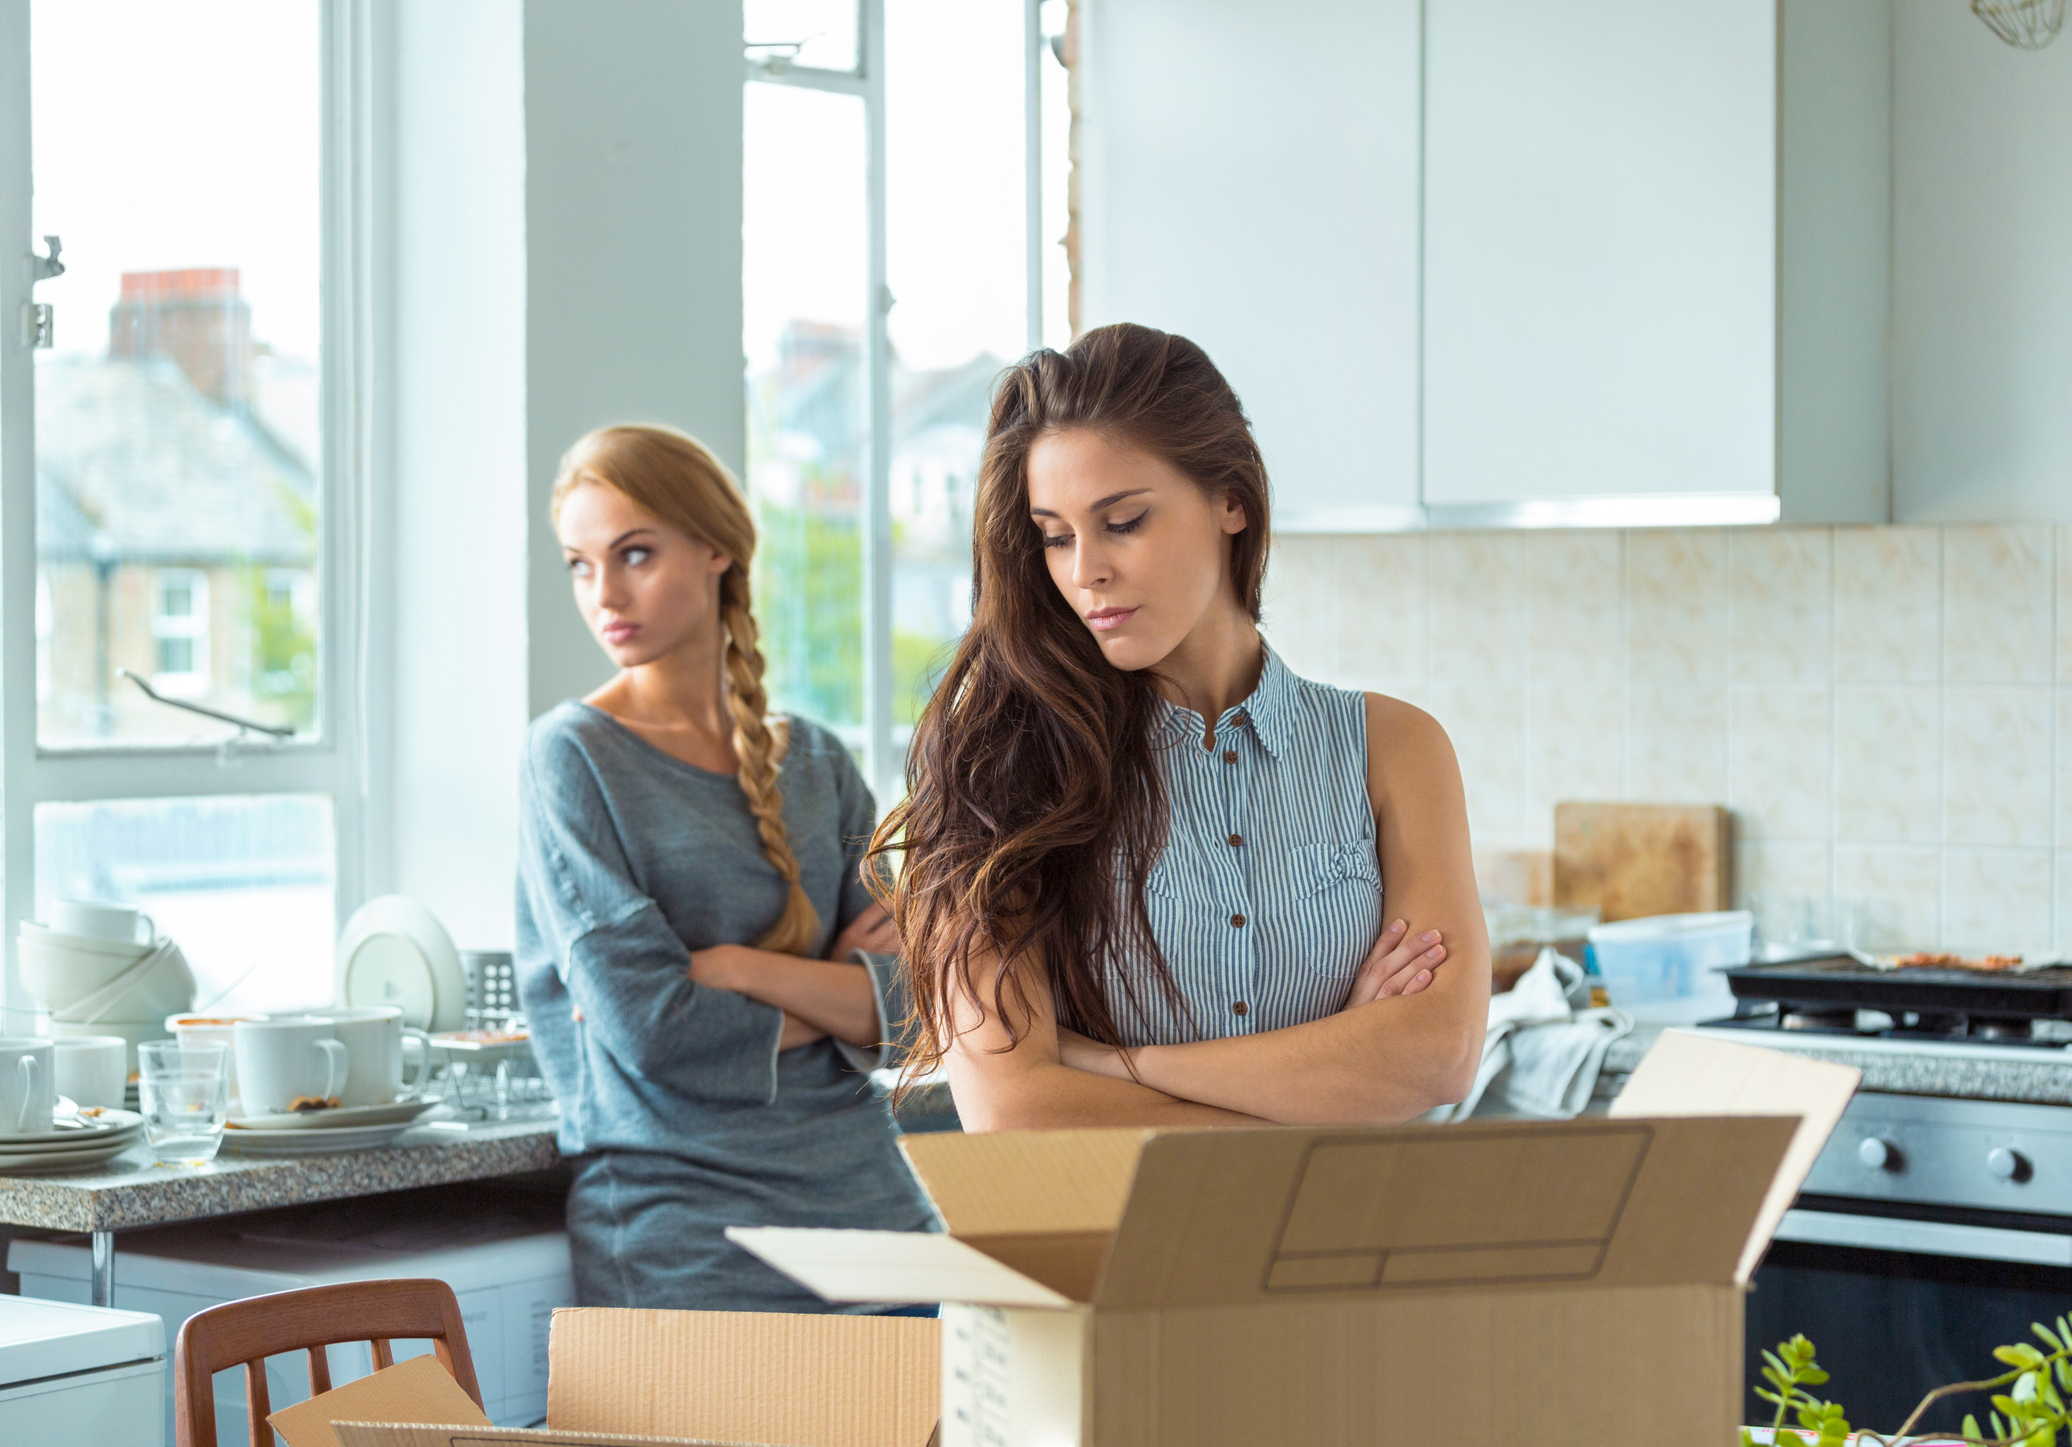 Two women in a kitchen, one standing with arms crossed looking at the other who is focused on an open cardboard box